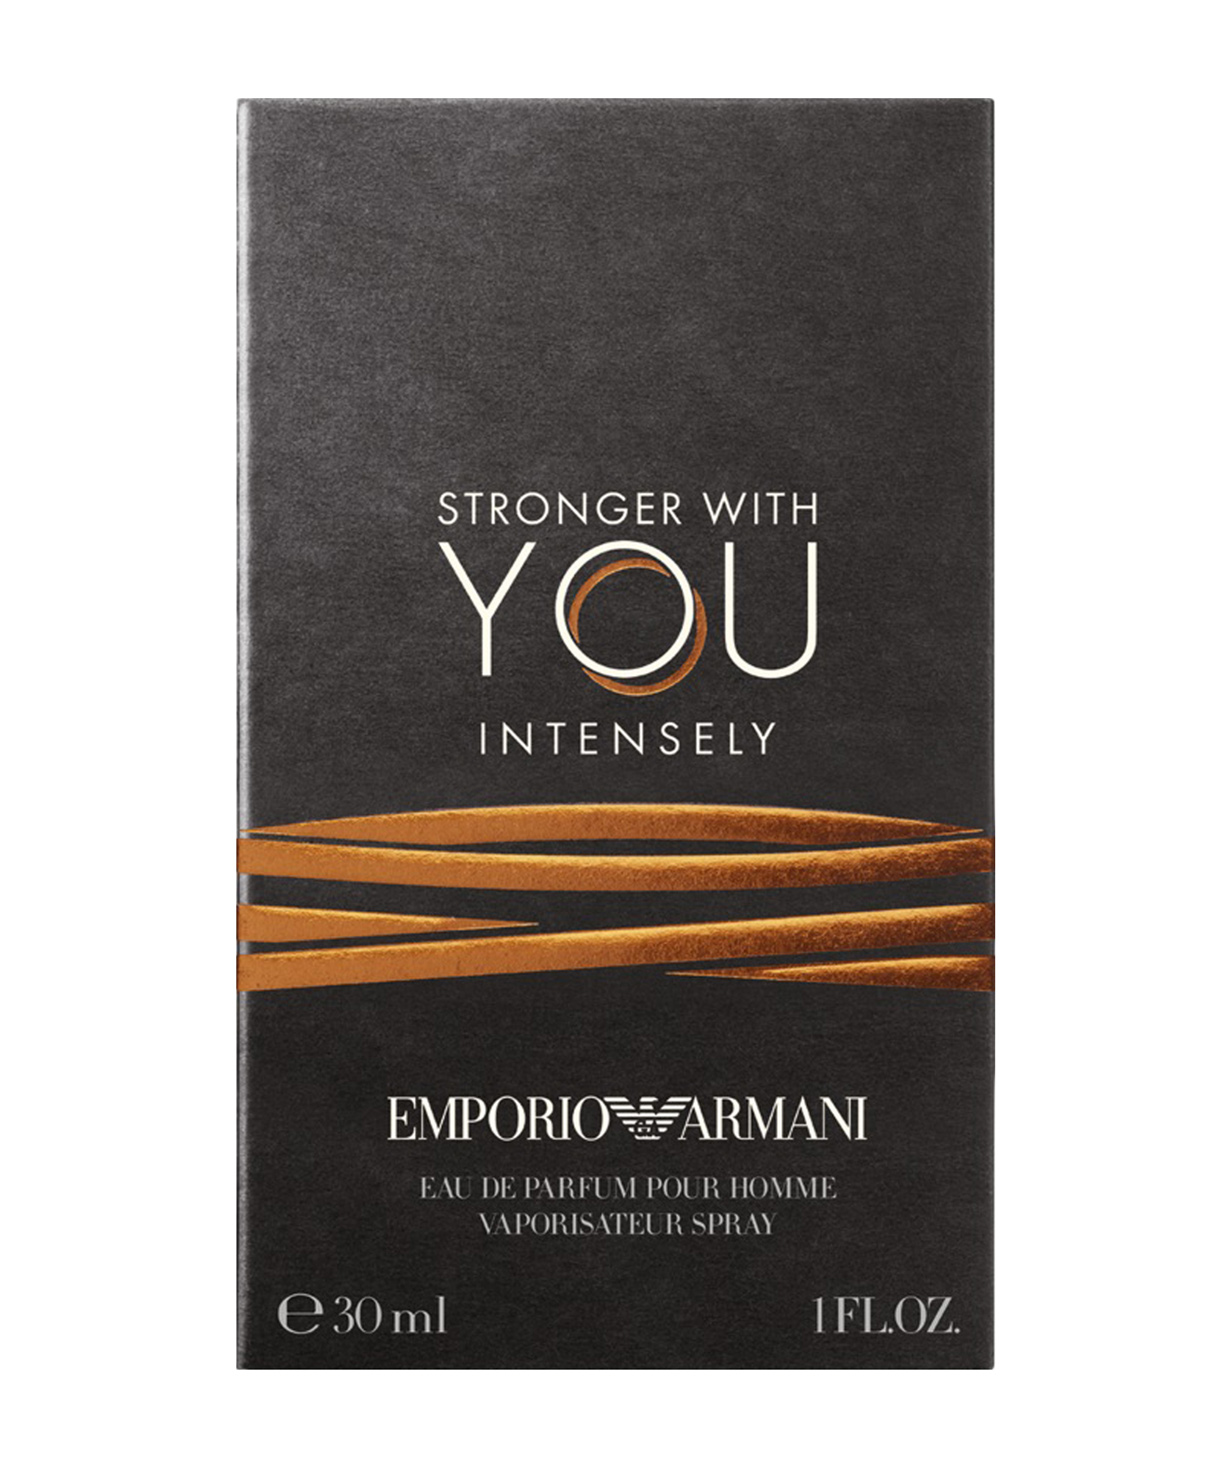 Духи `Emporio Armani` Stronger with You Intensely, 30 мл